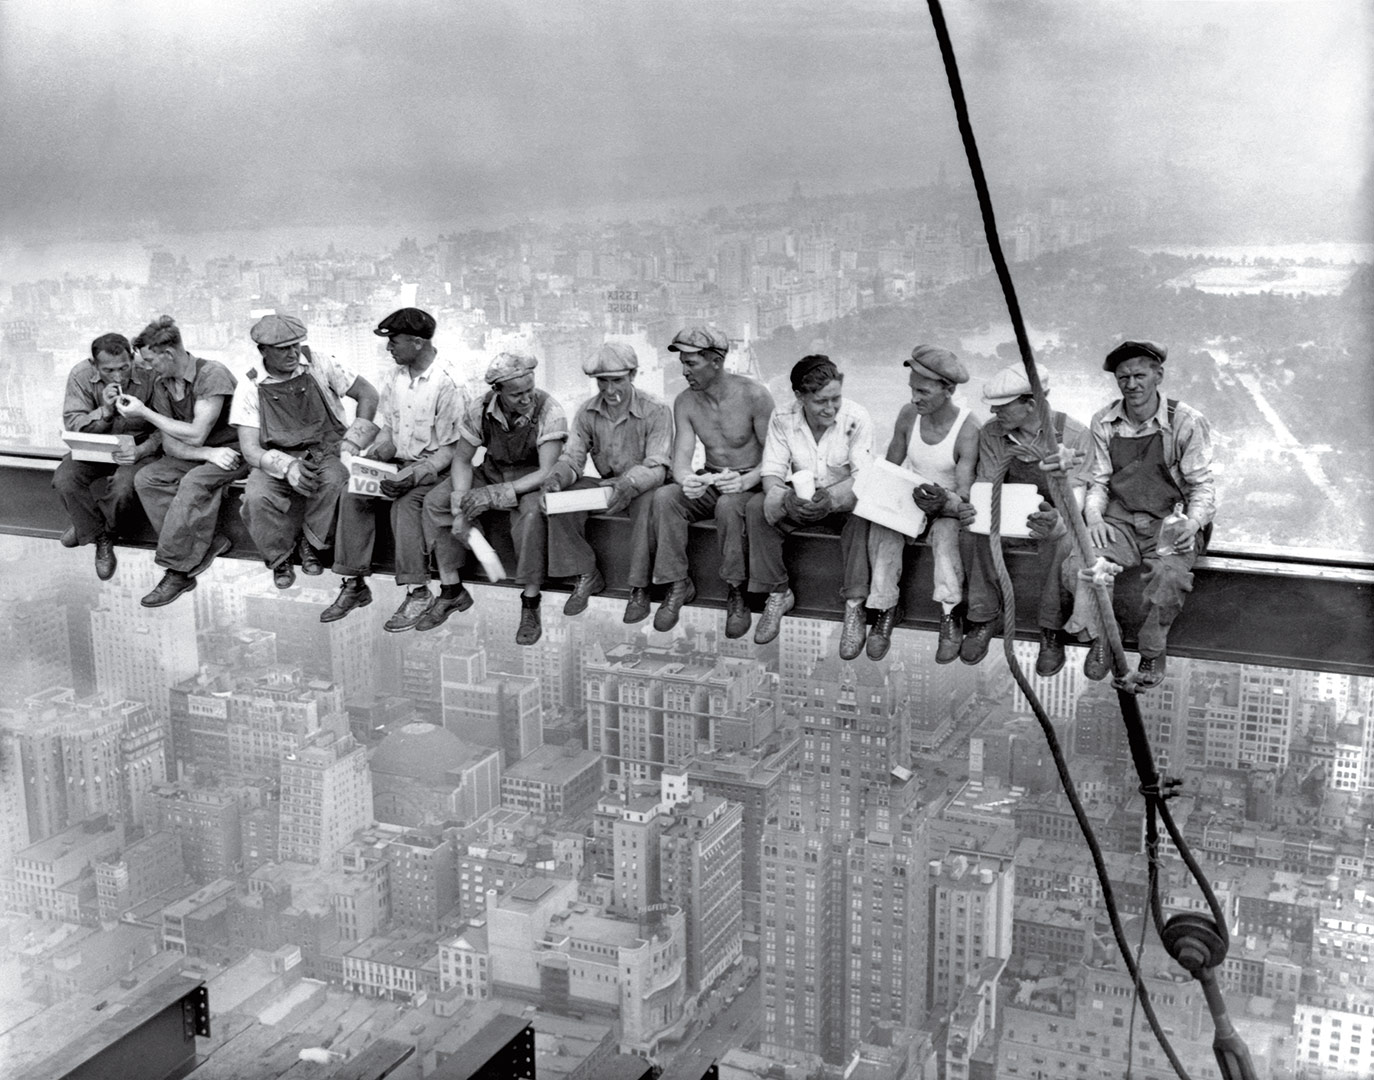 time-100-influential-photos-lunch-atop-skyscraper-19